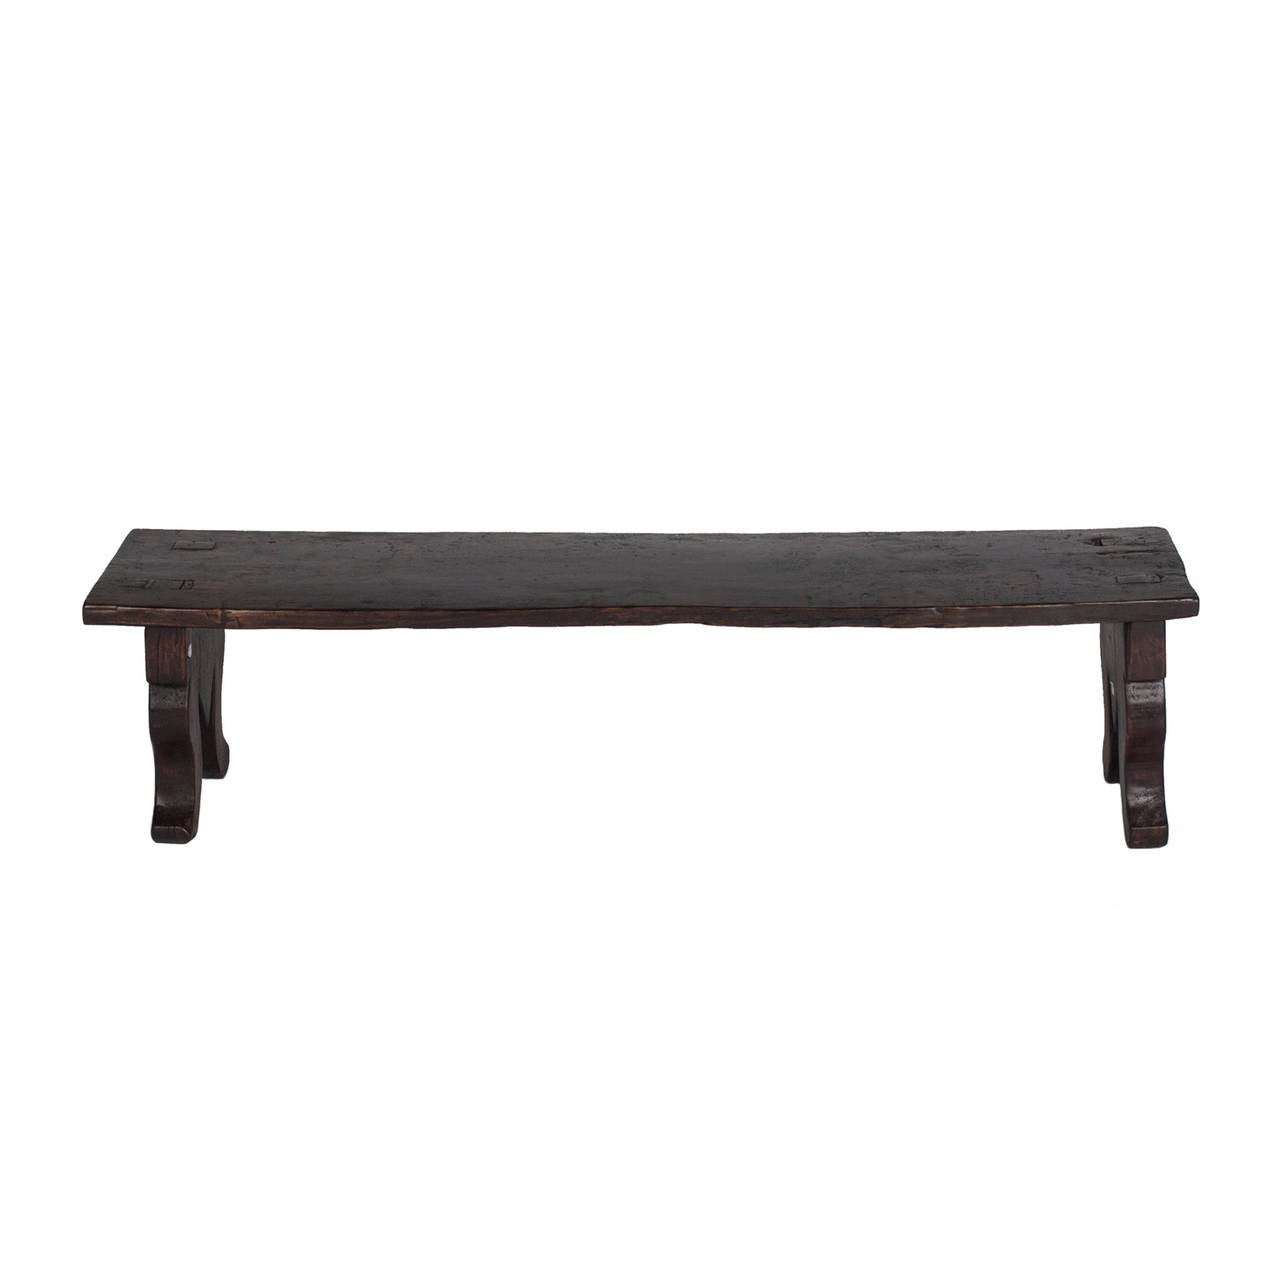 Yumu Primitive bench with carved side panel that reference the shape of an elephants' trunks.